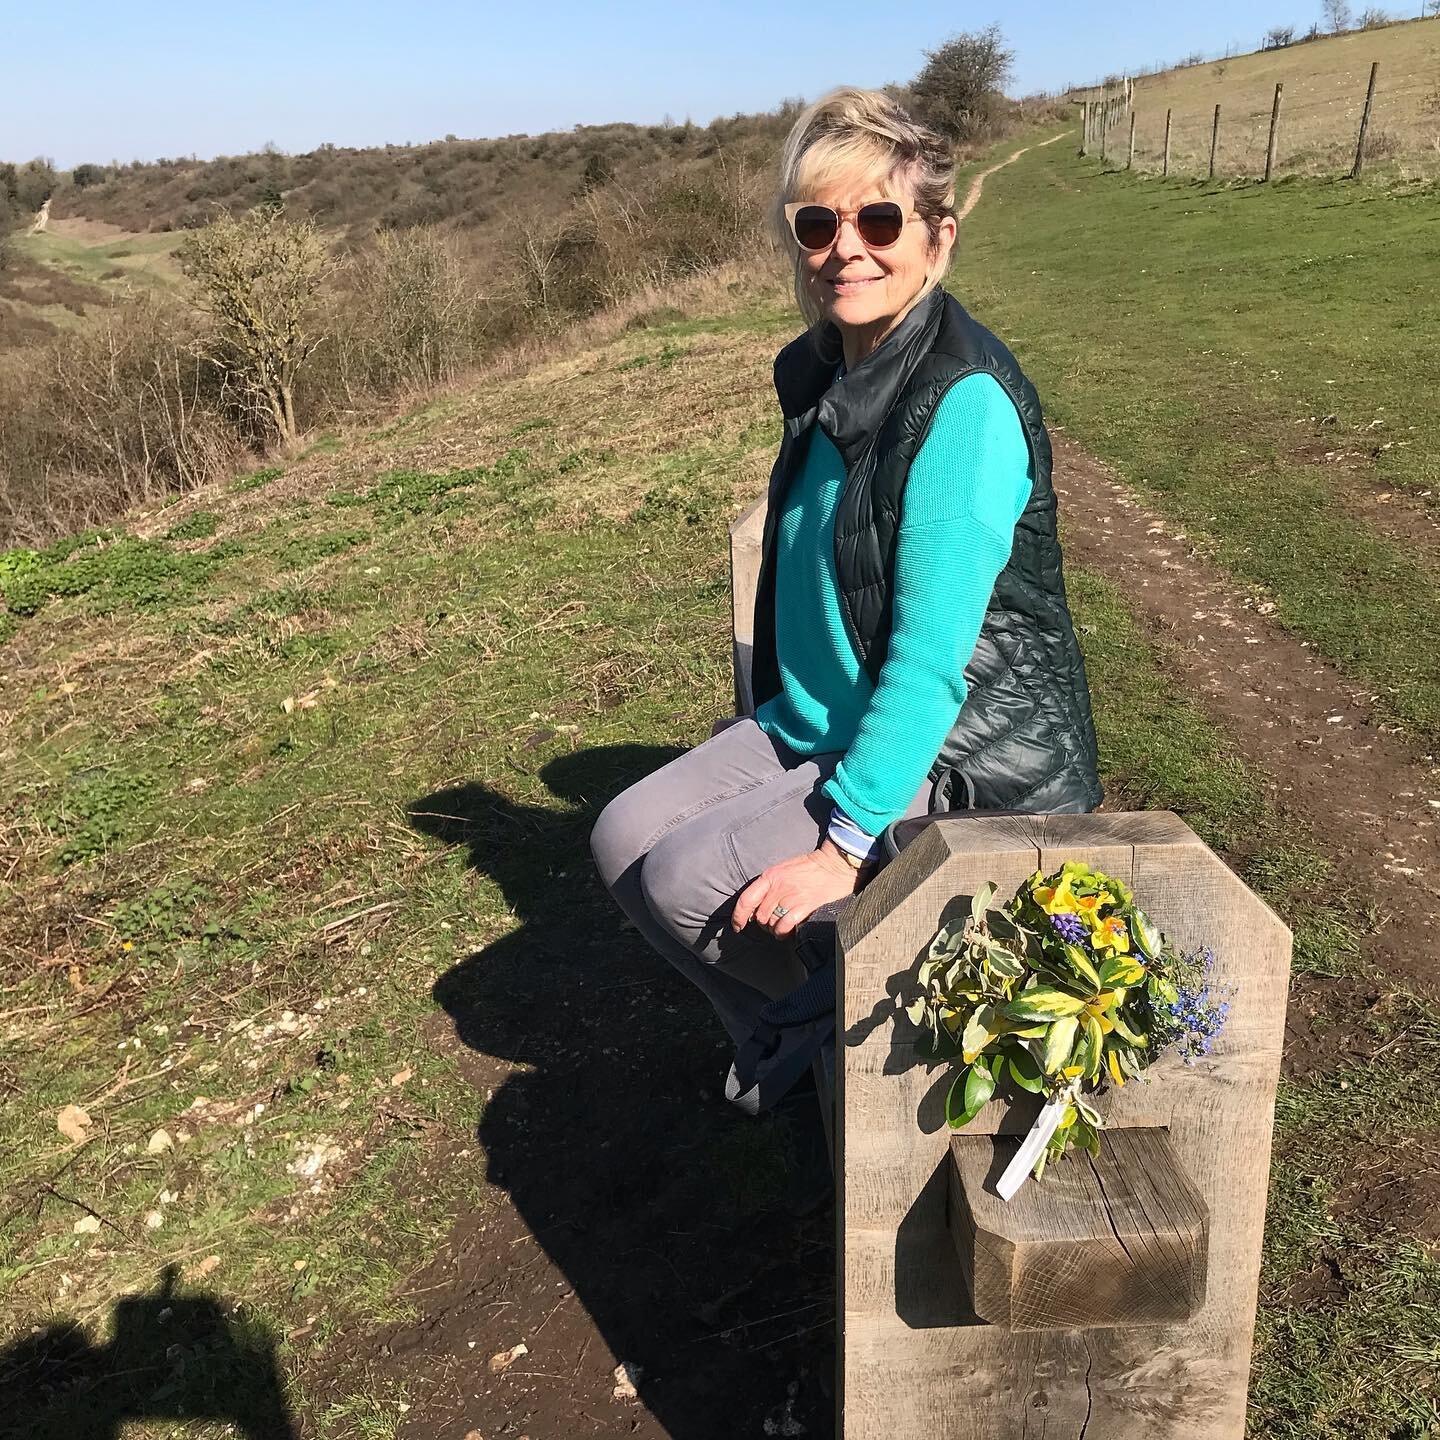 Here I am sitting on Tom&rsquo;s bench nearly 4 years since Tom died. I find it hard to believe he is not coming back. Soon after his death it was too painful for such thoughts. In the early months after his death I felt truly connected and would tal